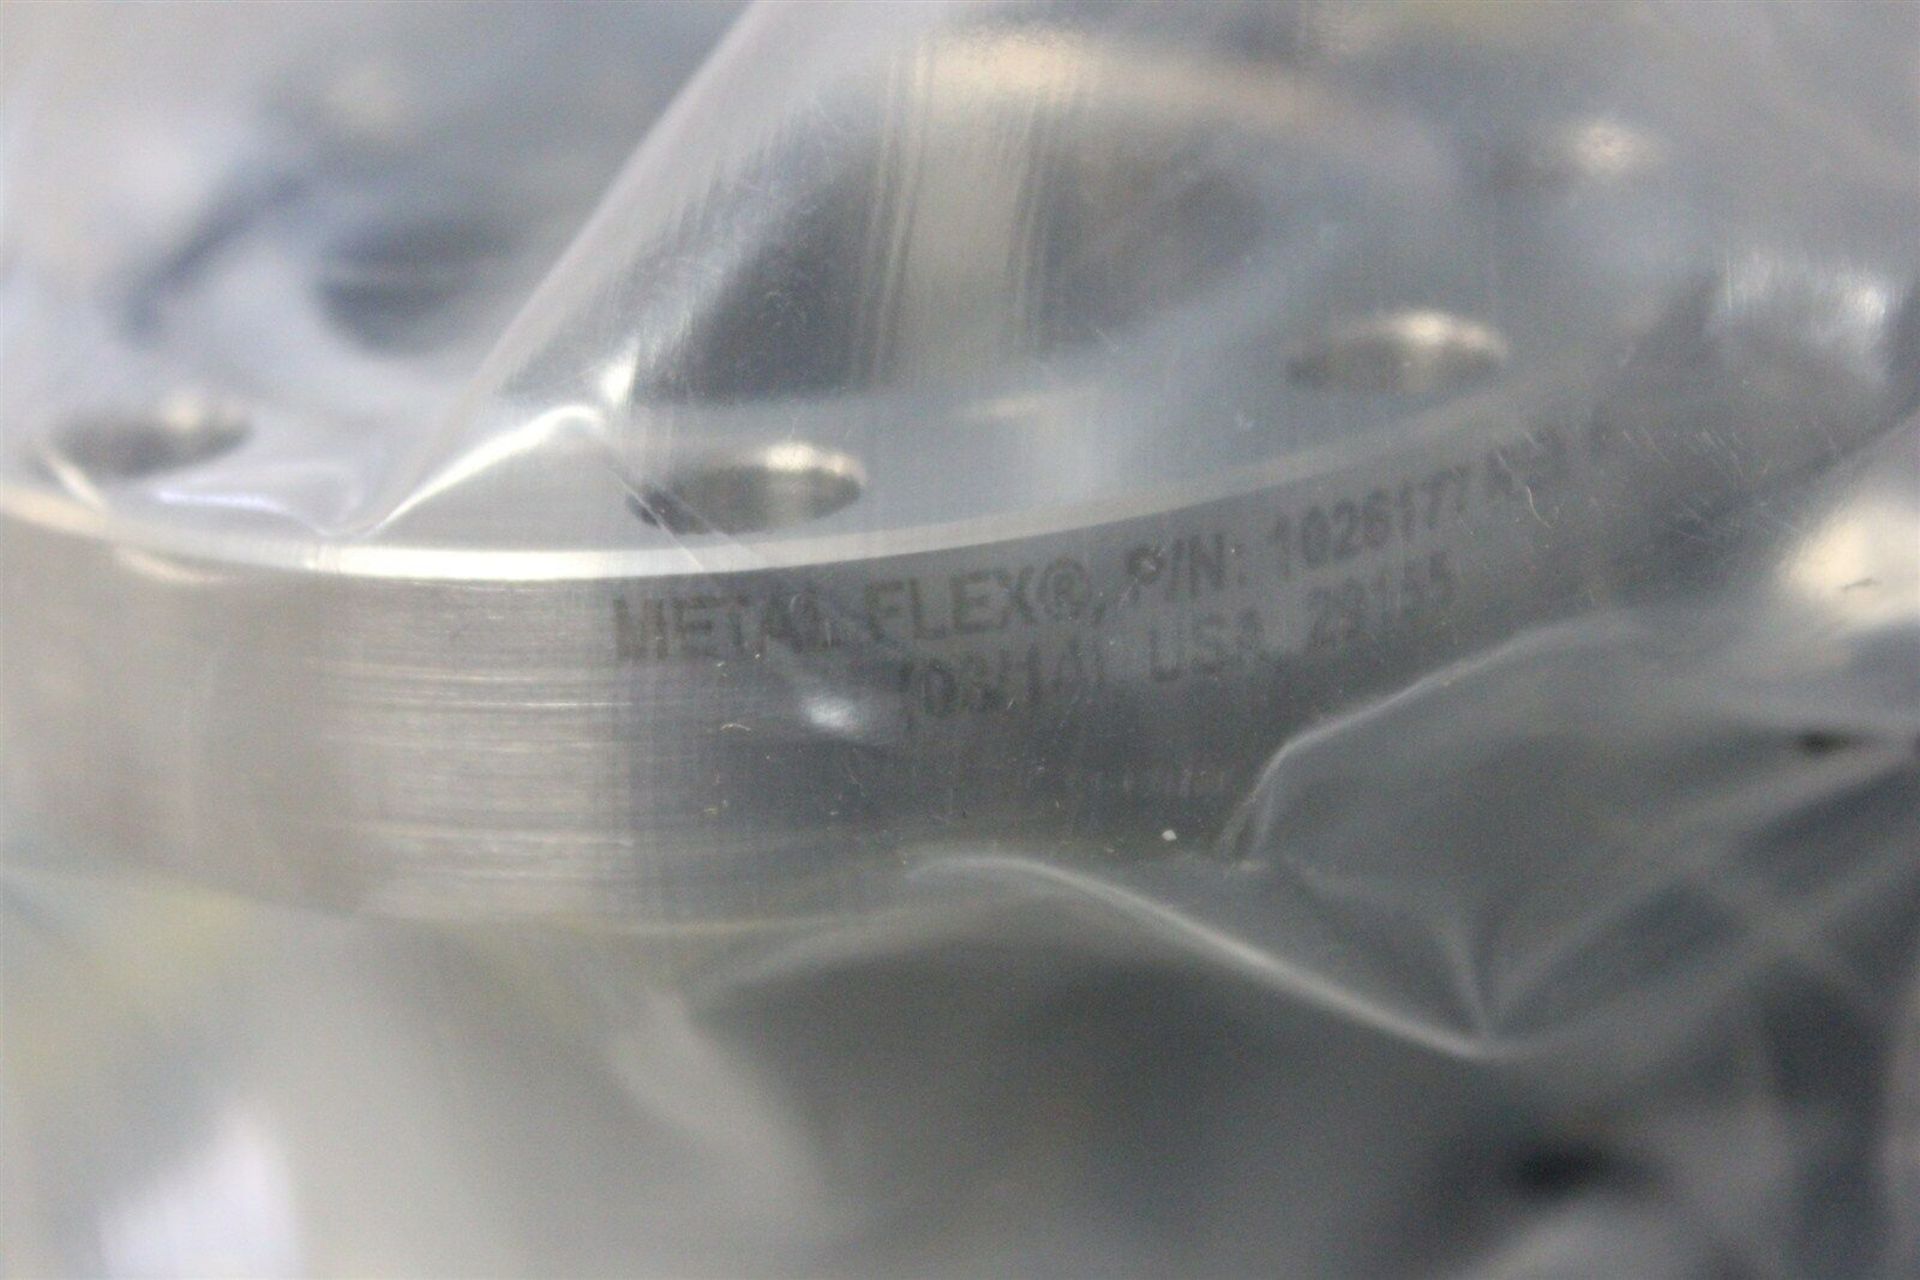 NEW METAL FLEX 3 3/8" STAINLESS STEEL HIGH VACUUM WELDED BELLOWSTUBE FITTING - Image 5 of 6